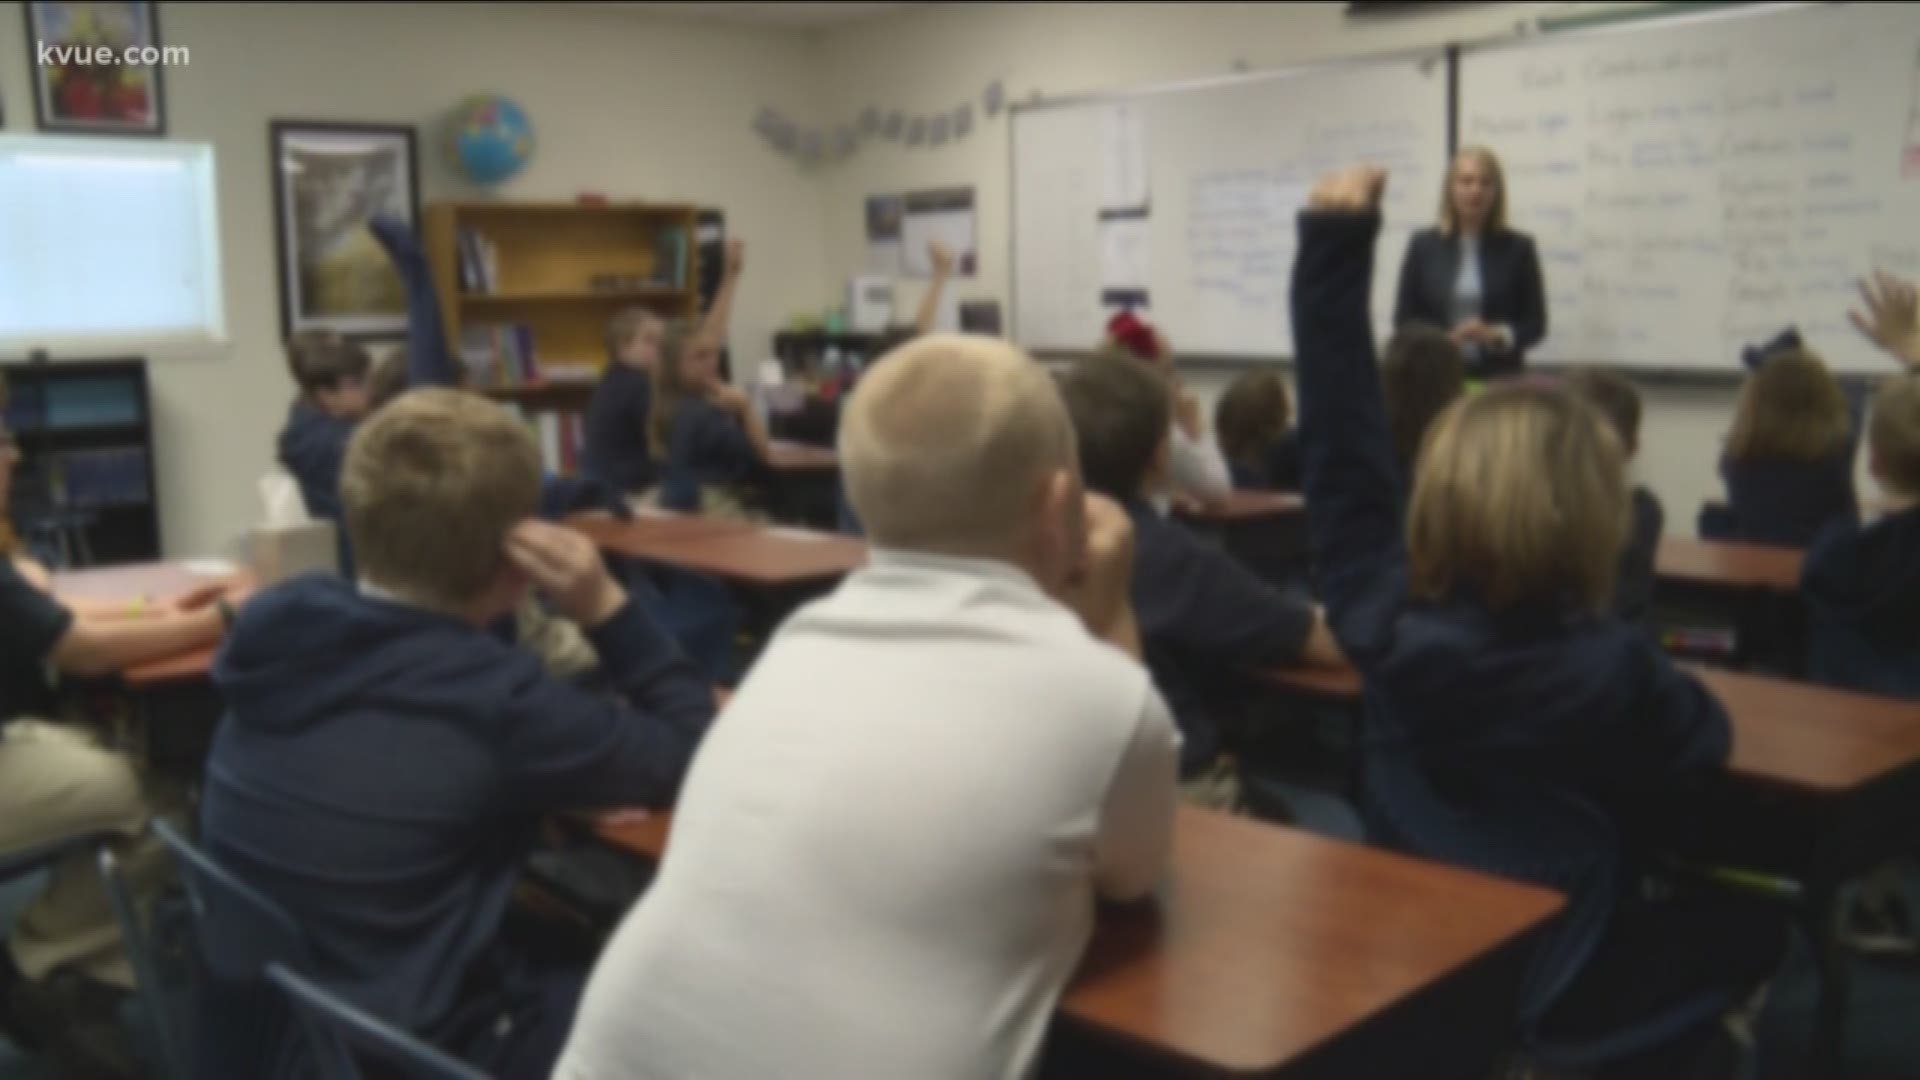 KVUE takes a deep dive into parents' concerns about bullying in schools and the progression of anti-bullying tactics in recent years to stop it.